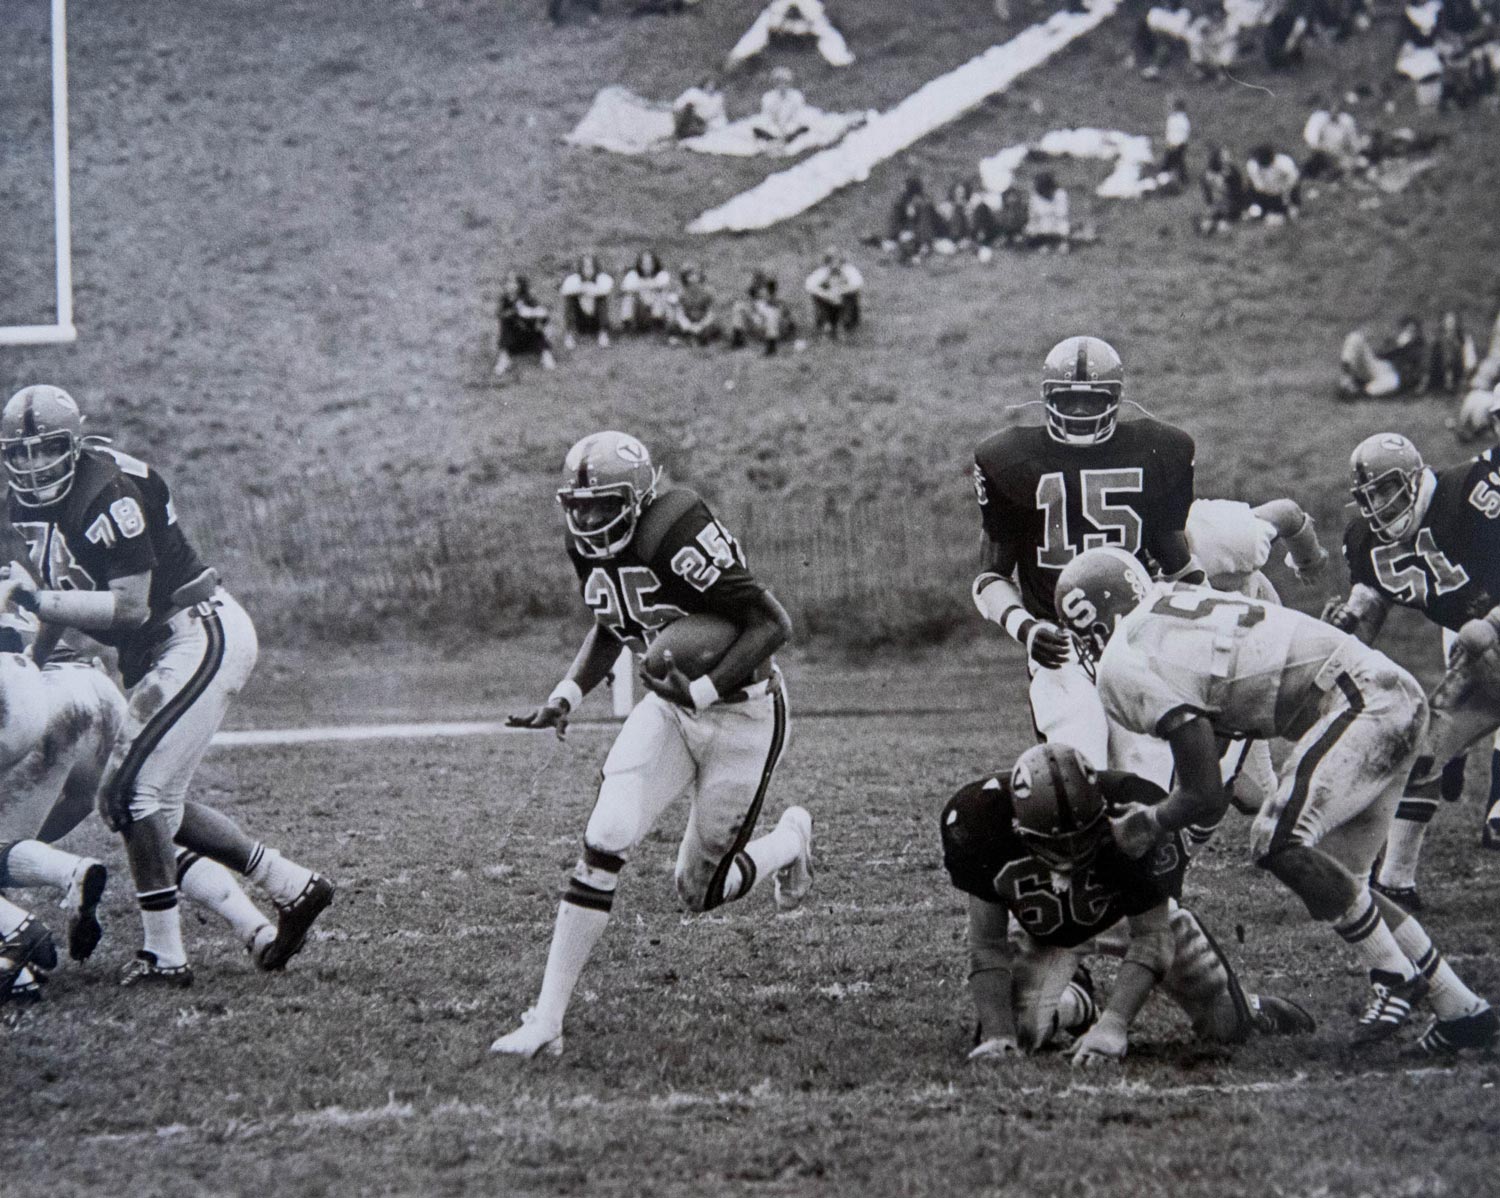 Kent Merritt running with the football during a game, black and white image